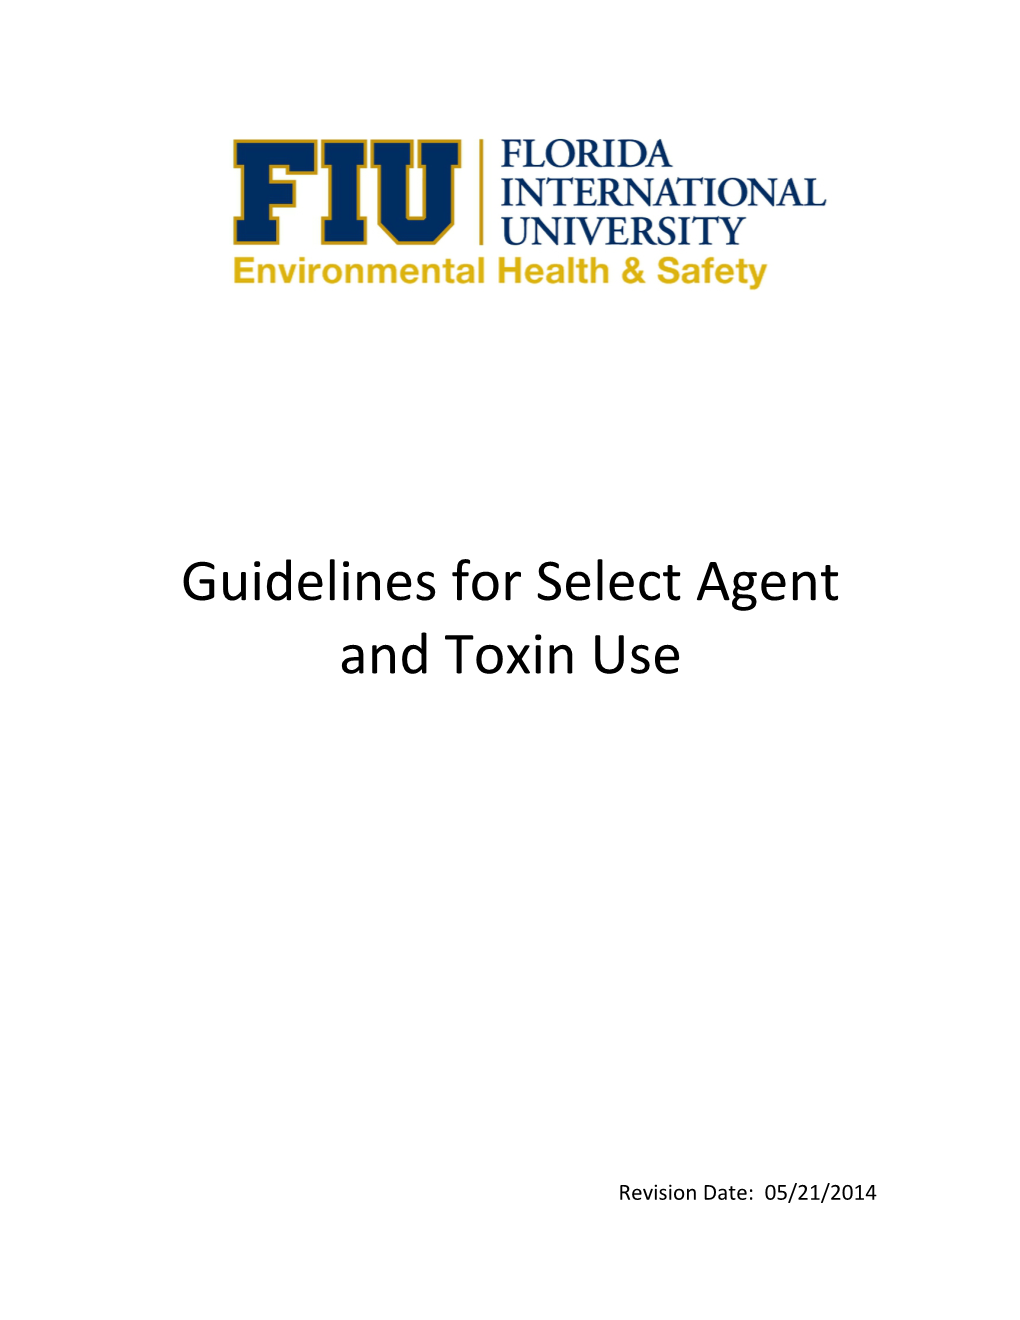 Select Agent and Toxin Use Guidelines Are Based Upon the Guidelines Of